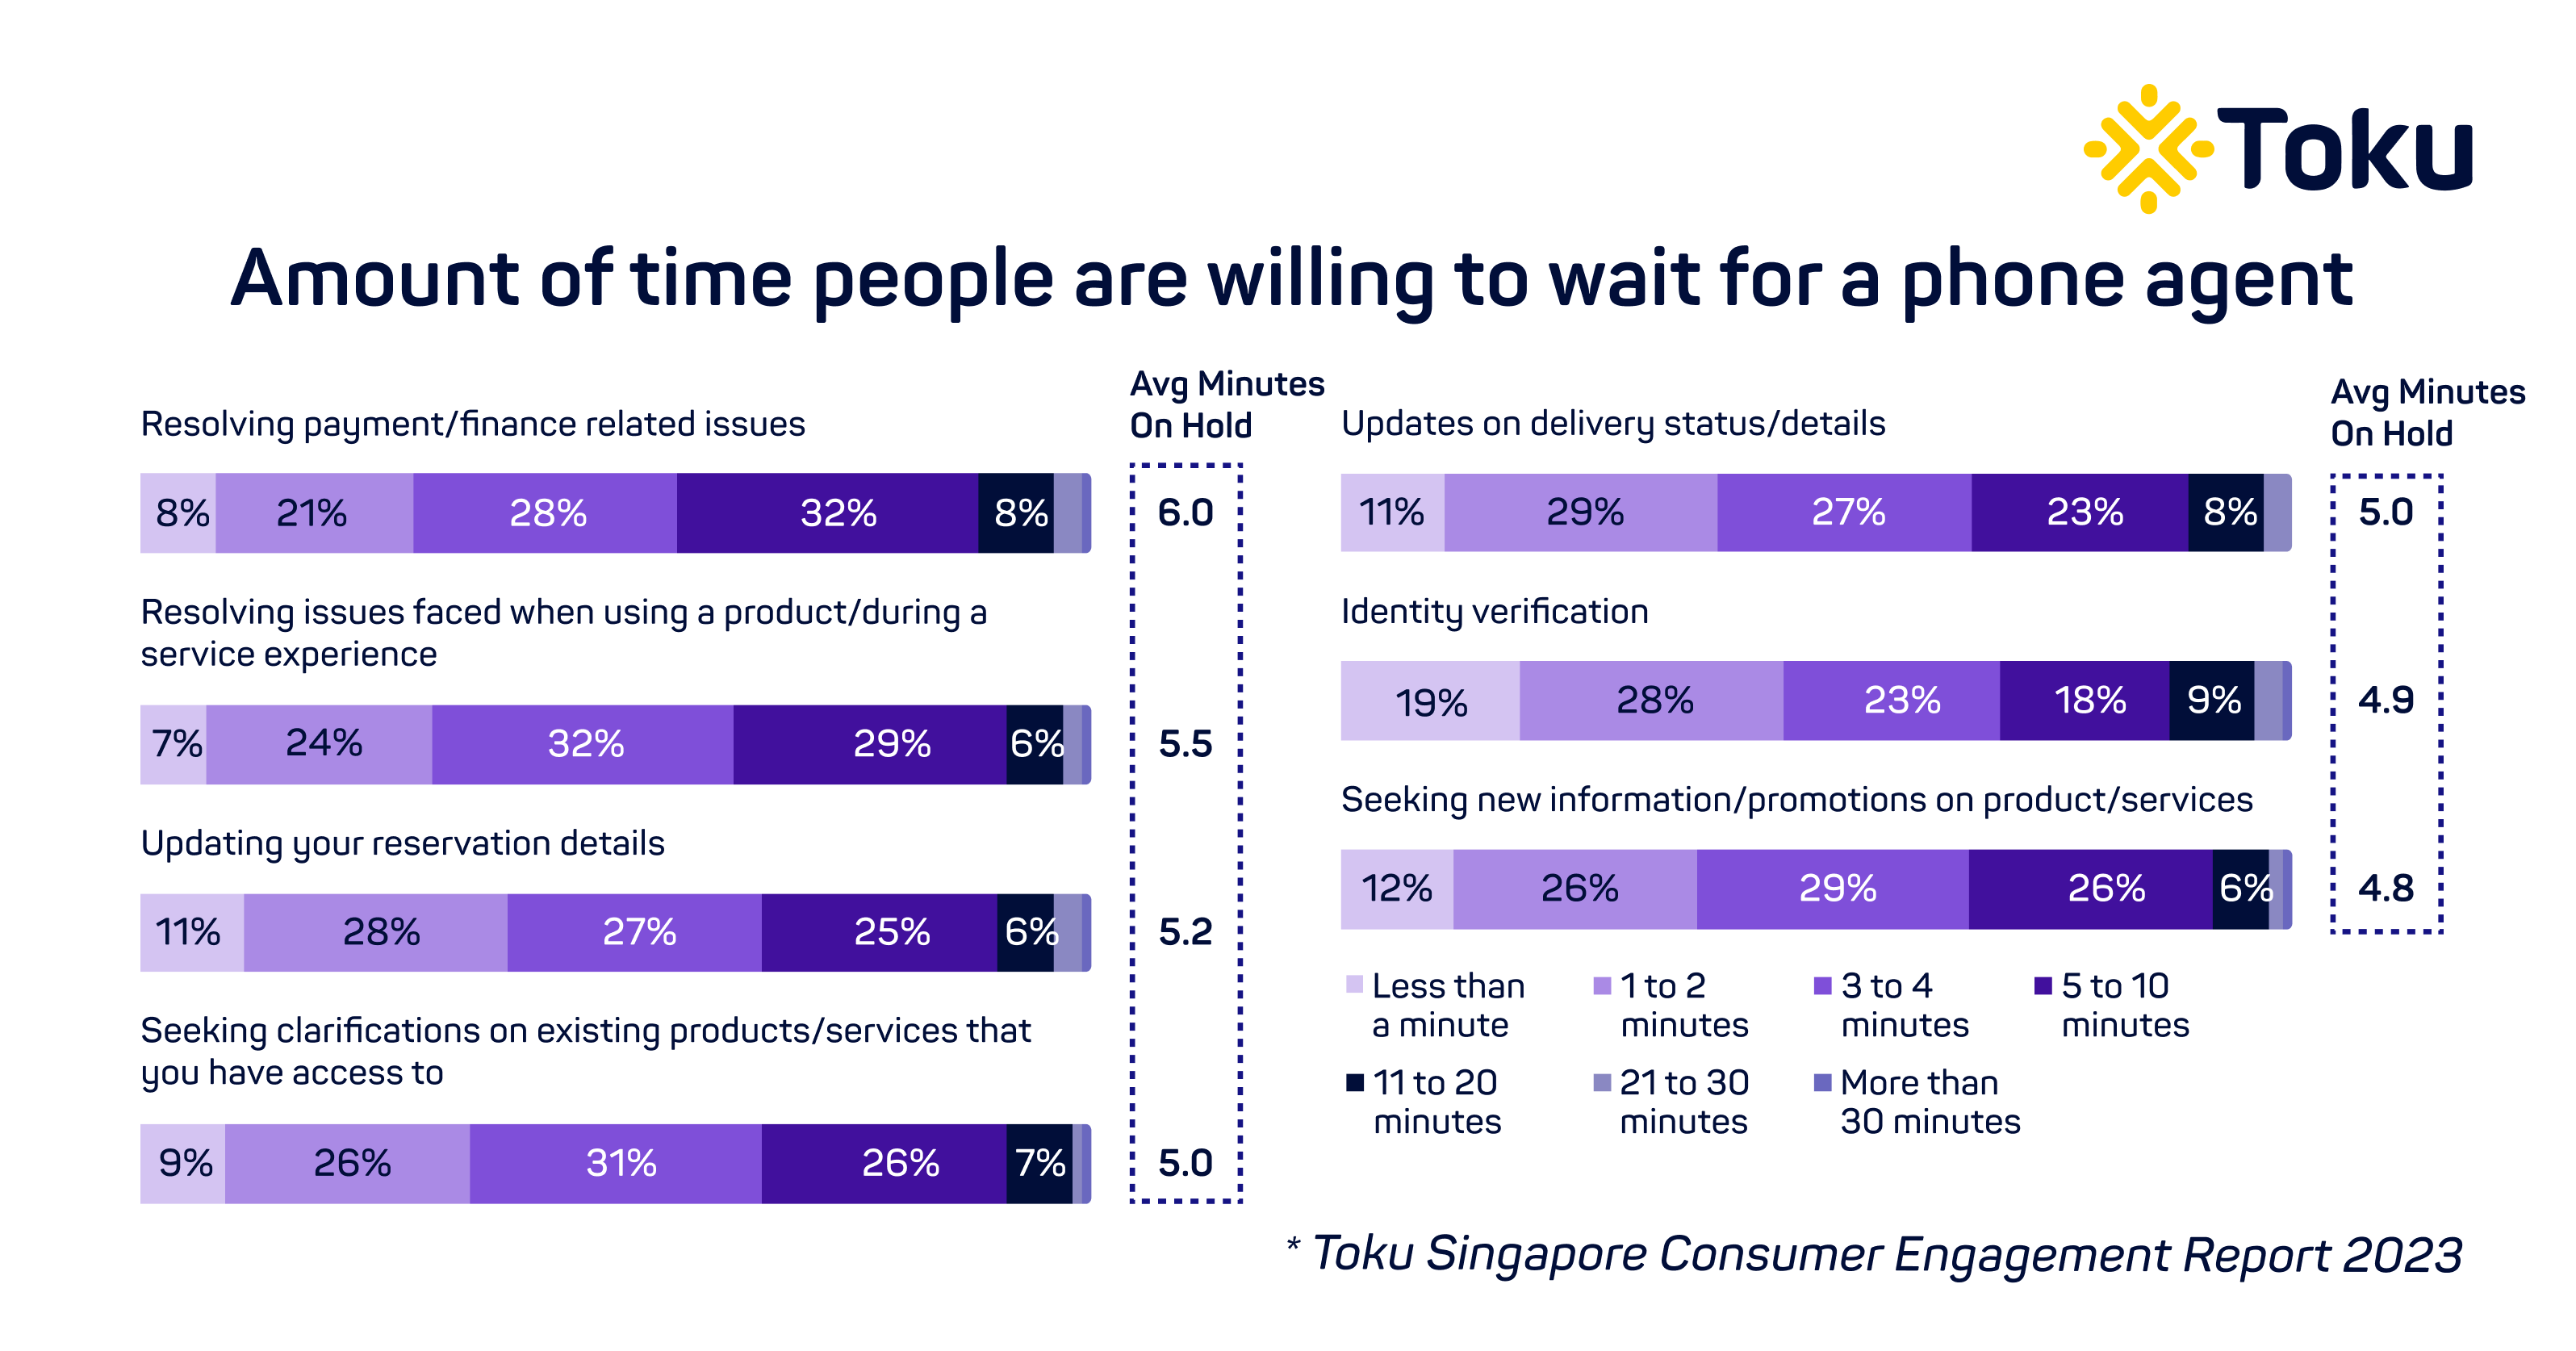 2023 Amount of time people are willing to wait for phone agent